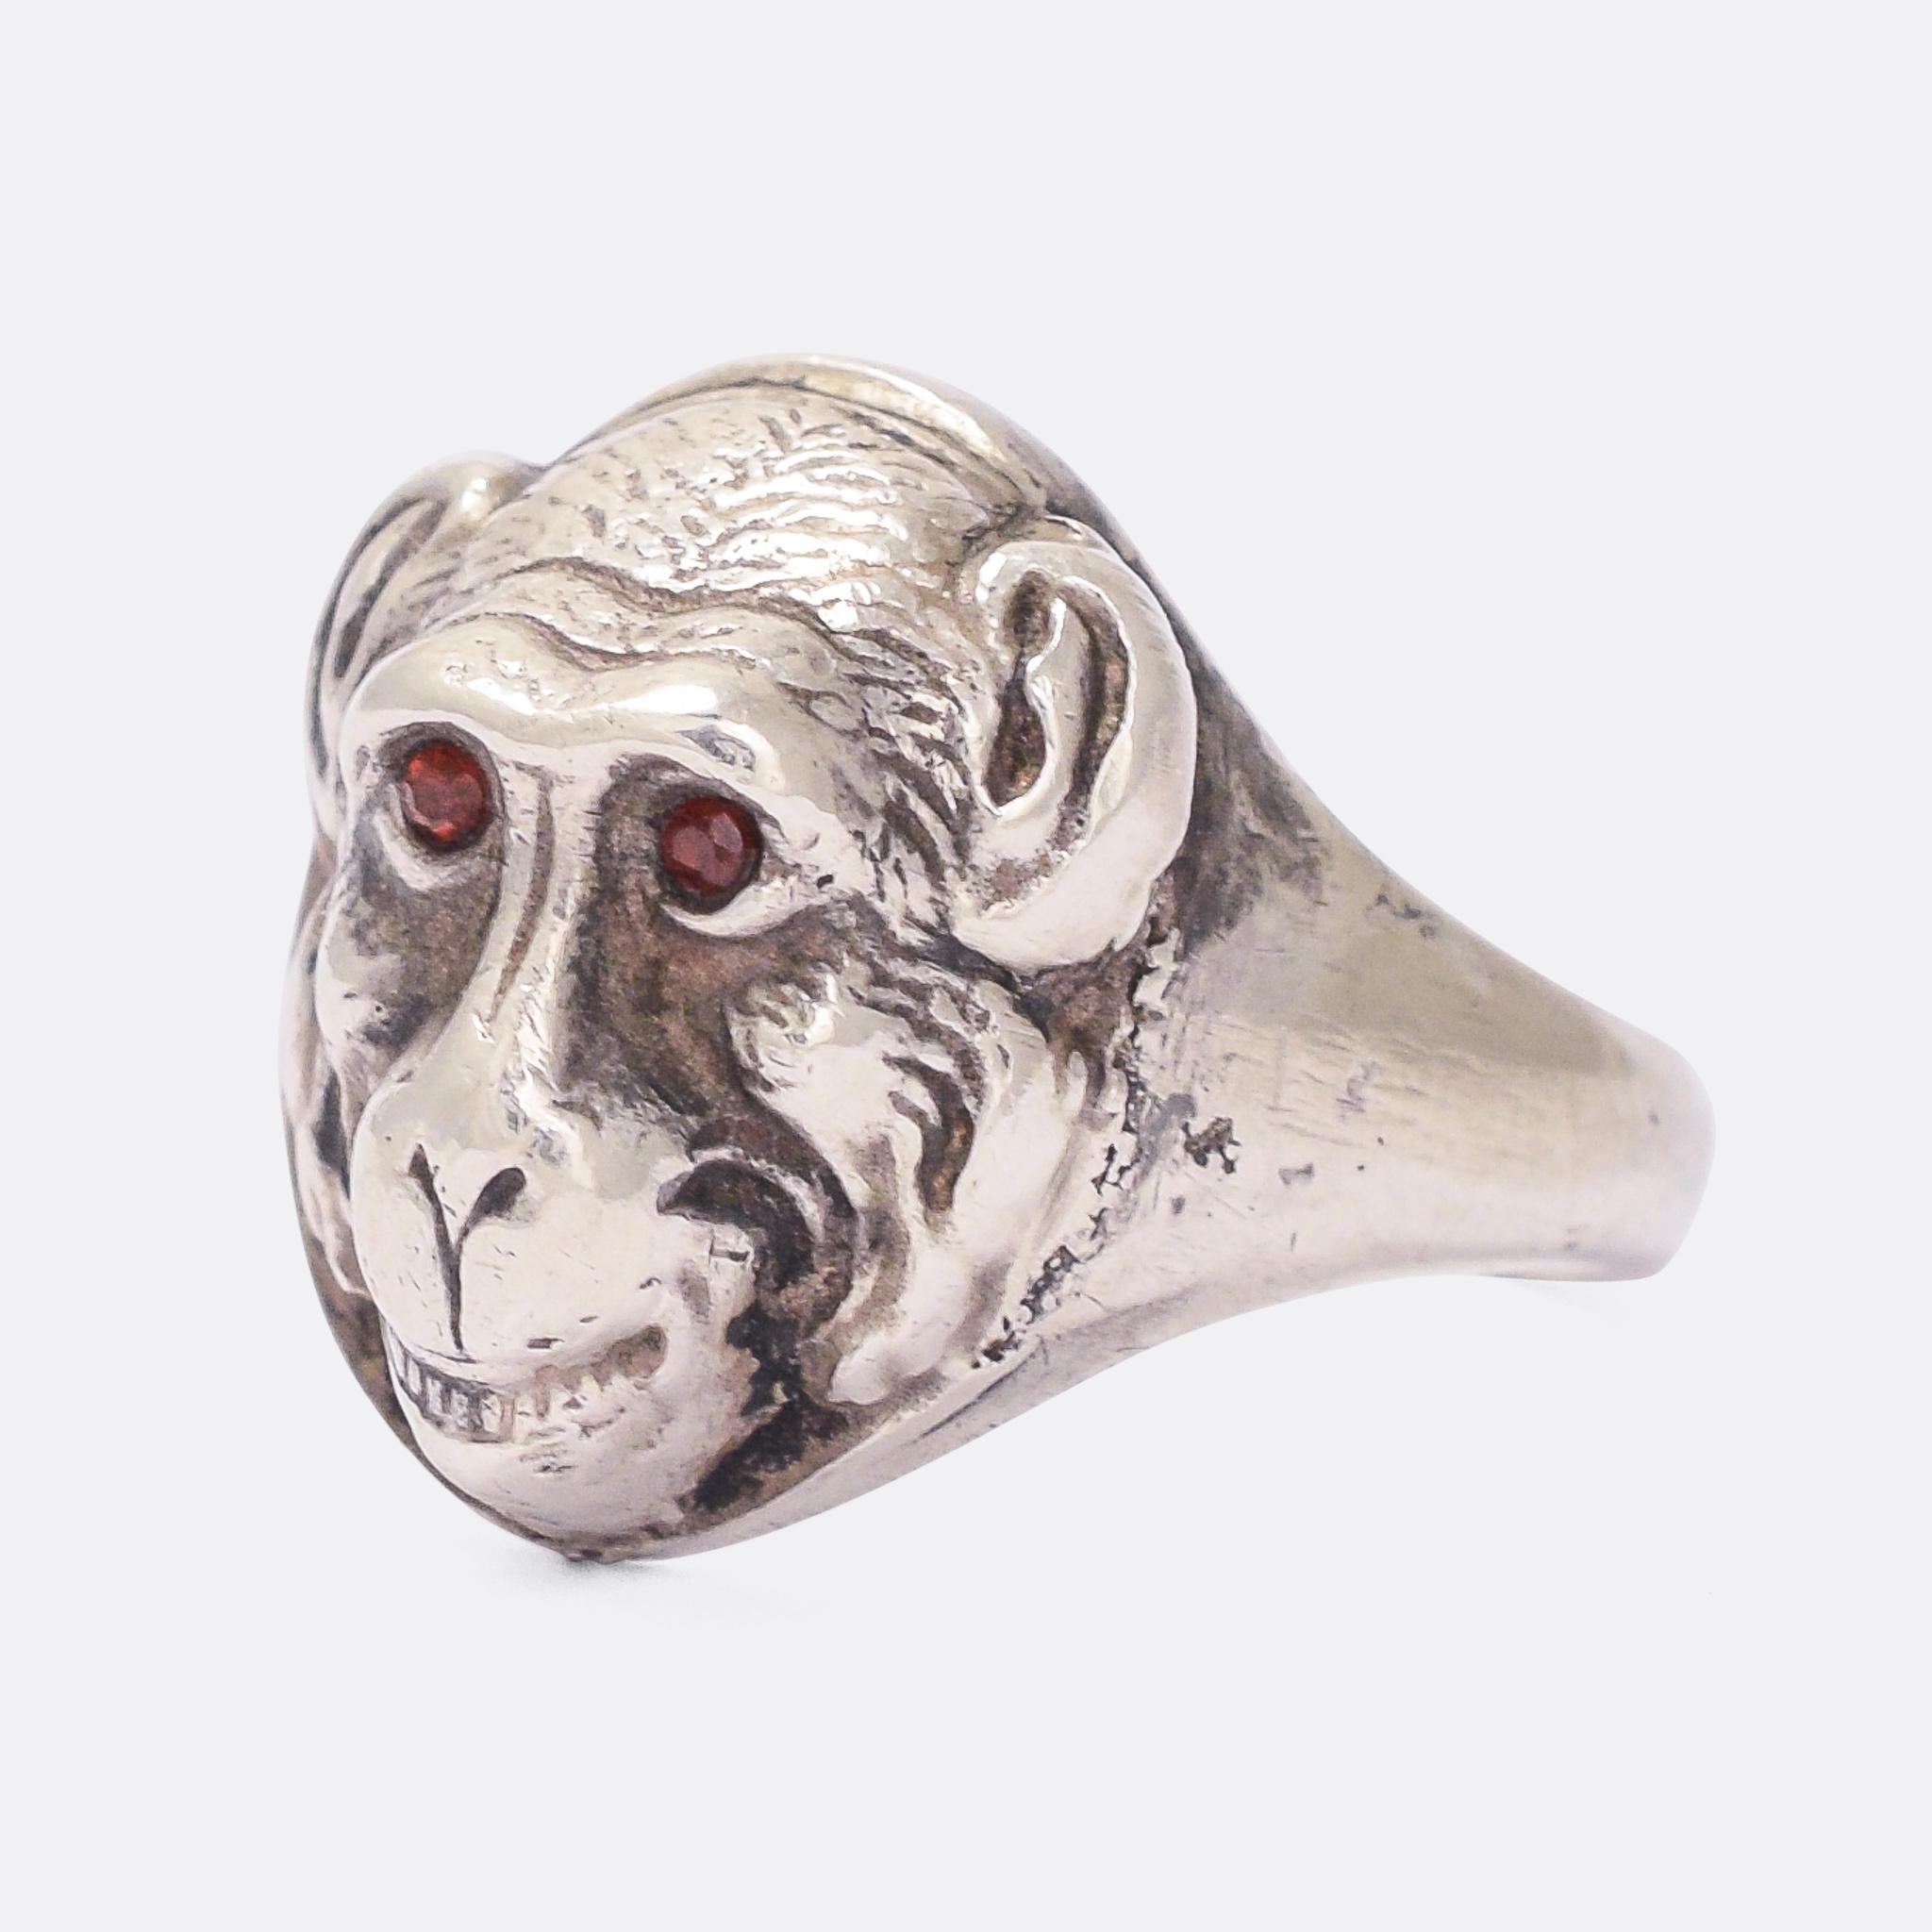 A highly unusual antique French ring, the head modelled as a realistic depiction of a monkey/chimpanzee. It's incredibly well detailed, crafted in silver and set with ruby eyes. Dating from the late Victorian period, circa 1900.

STONES 
Ruby

RING